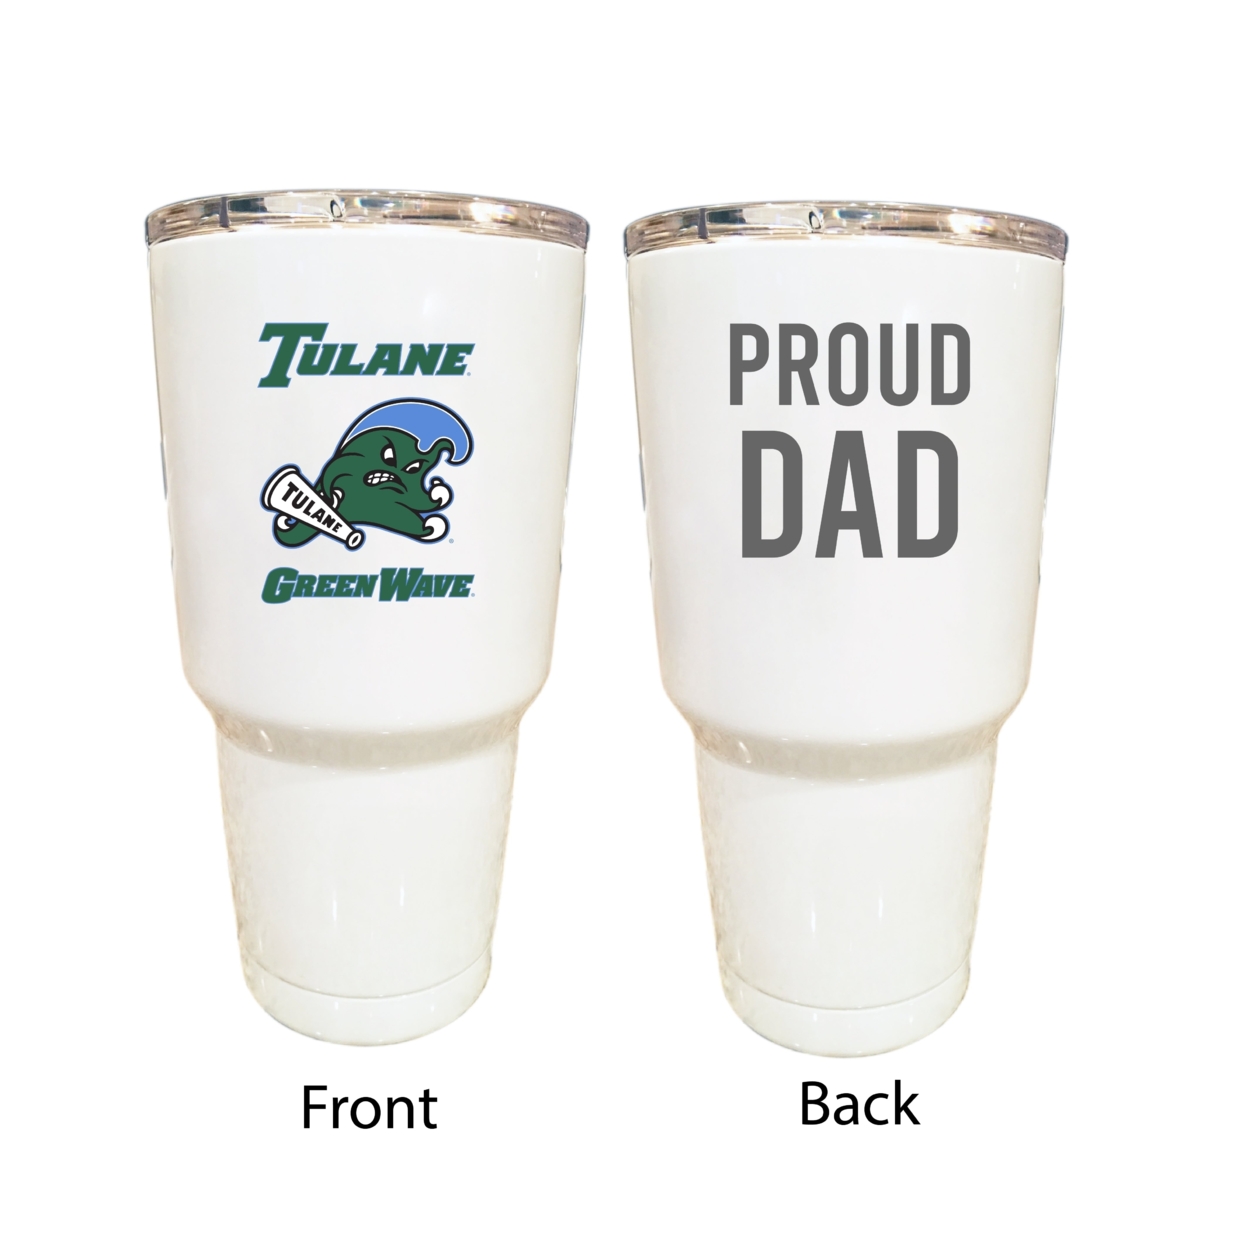 Tulane University Green Wave Proud Dad 24 Oz Insulated Stainless Steel Tumblers Choose Your Color. - White